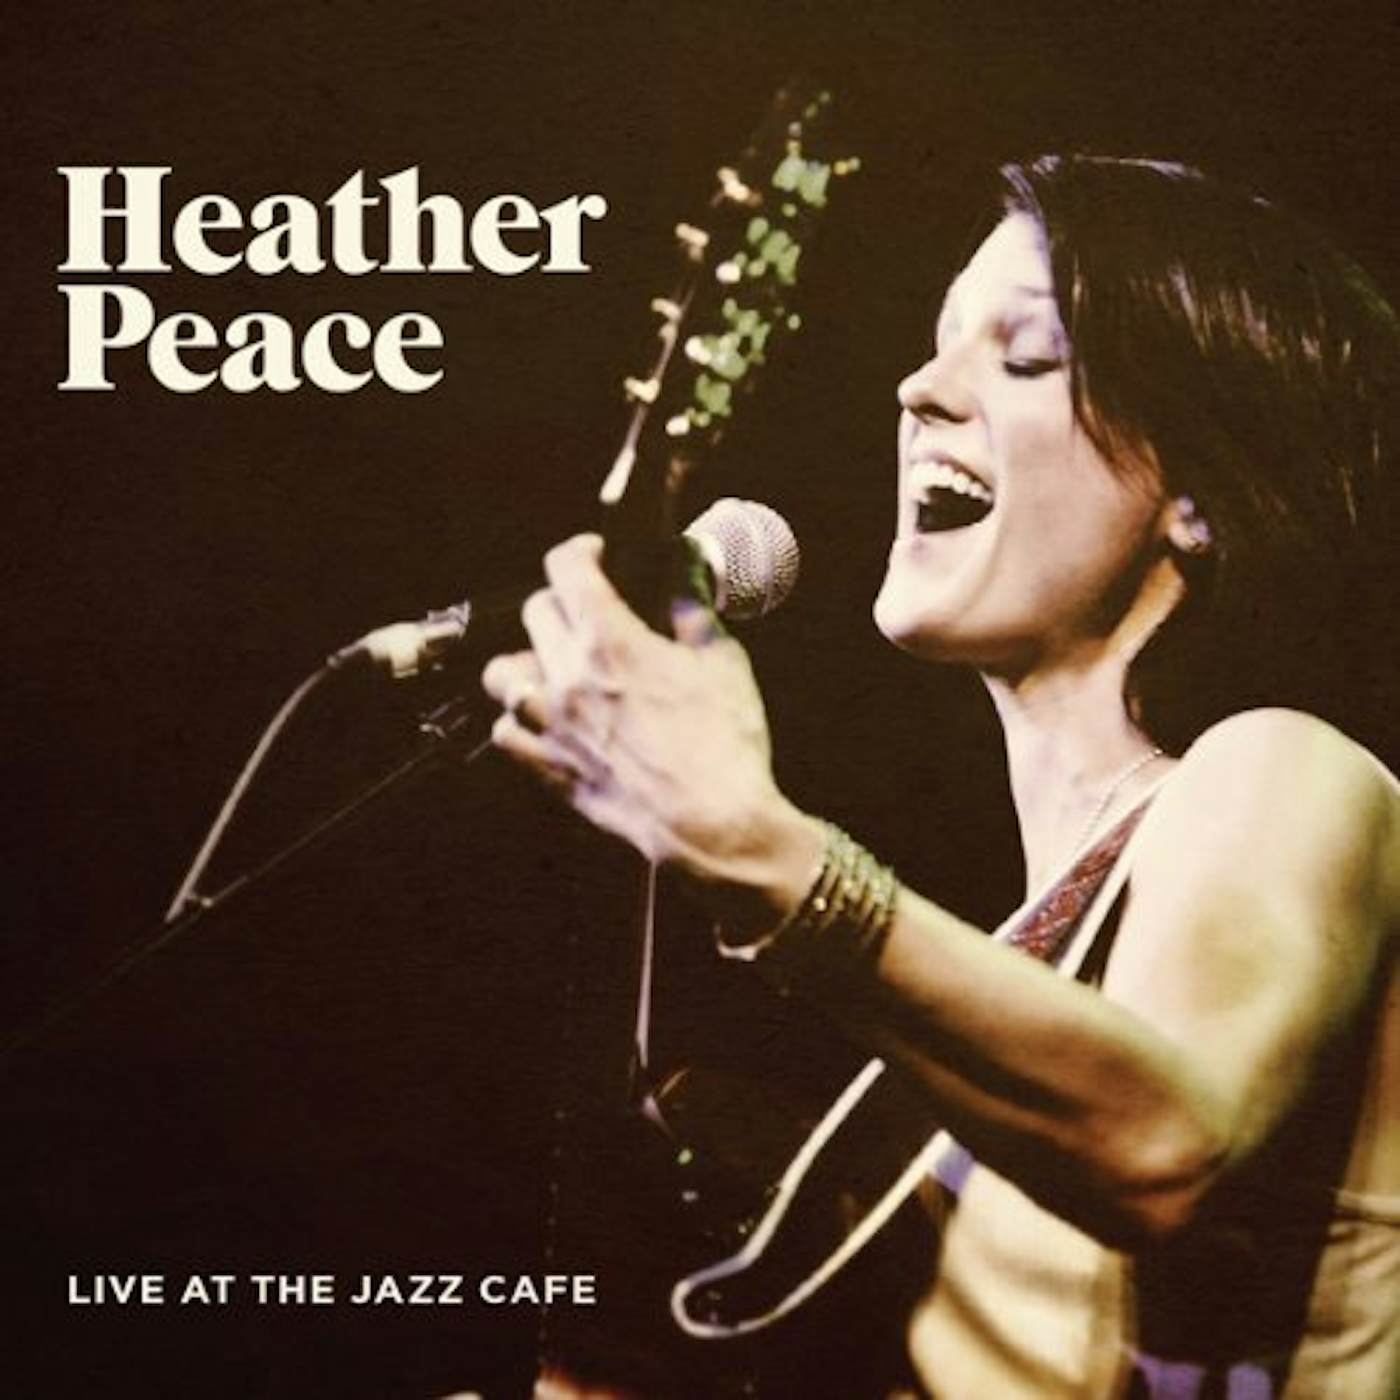 Heather Peace LIVE AT THE JAZZ CAFE CD